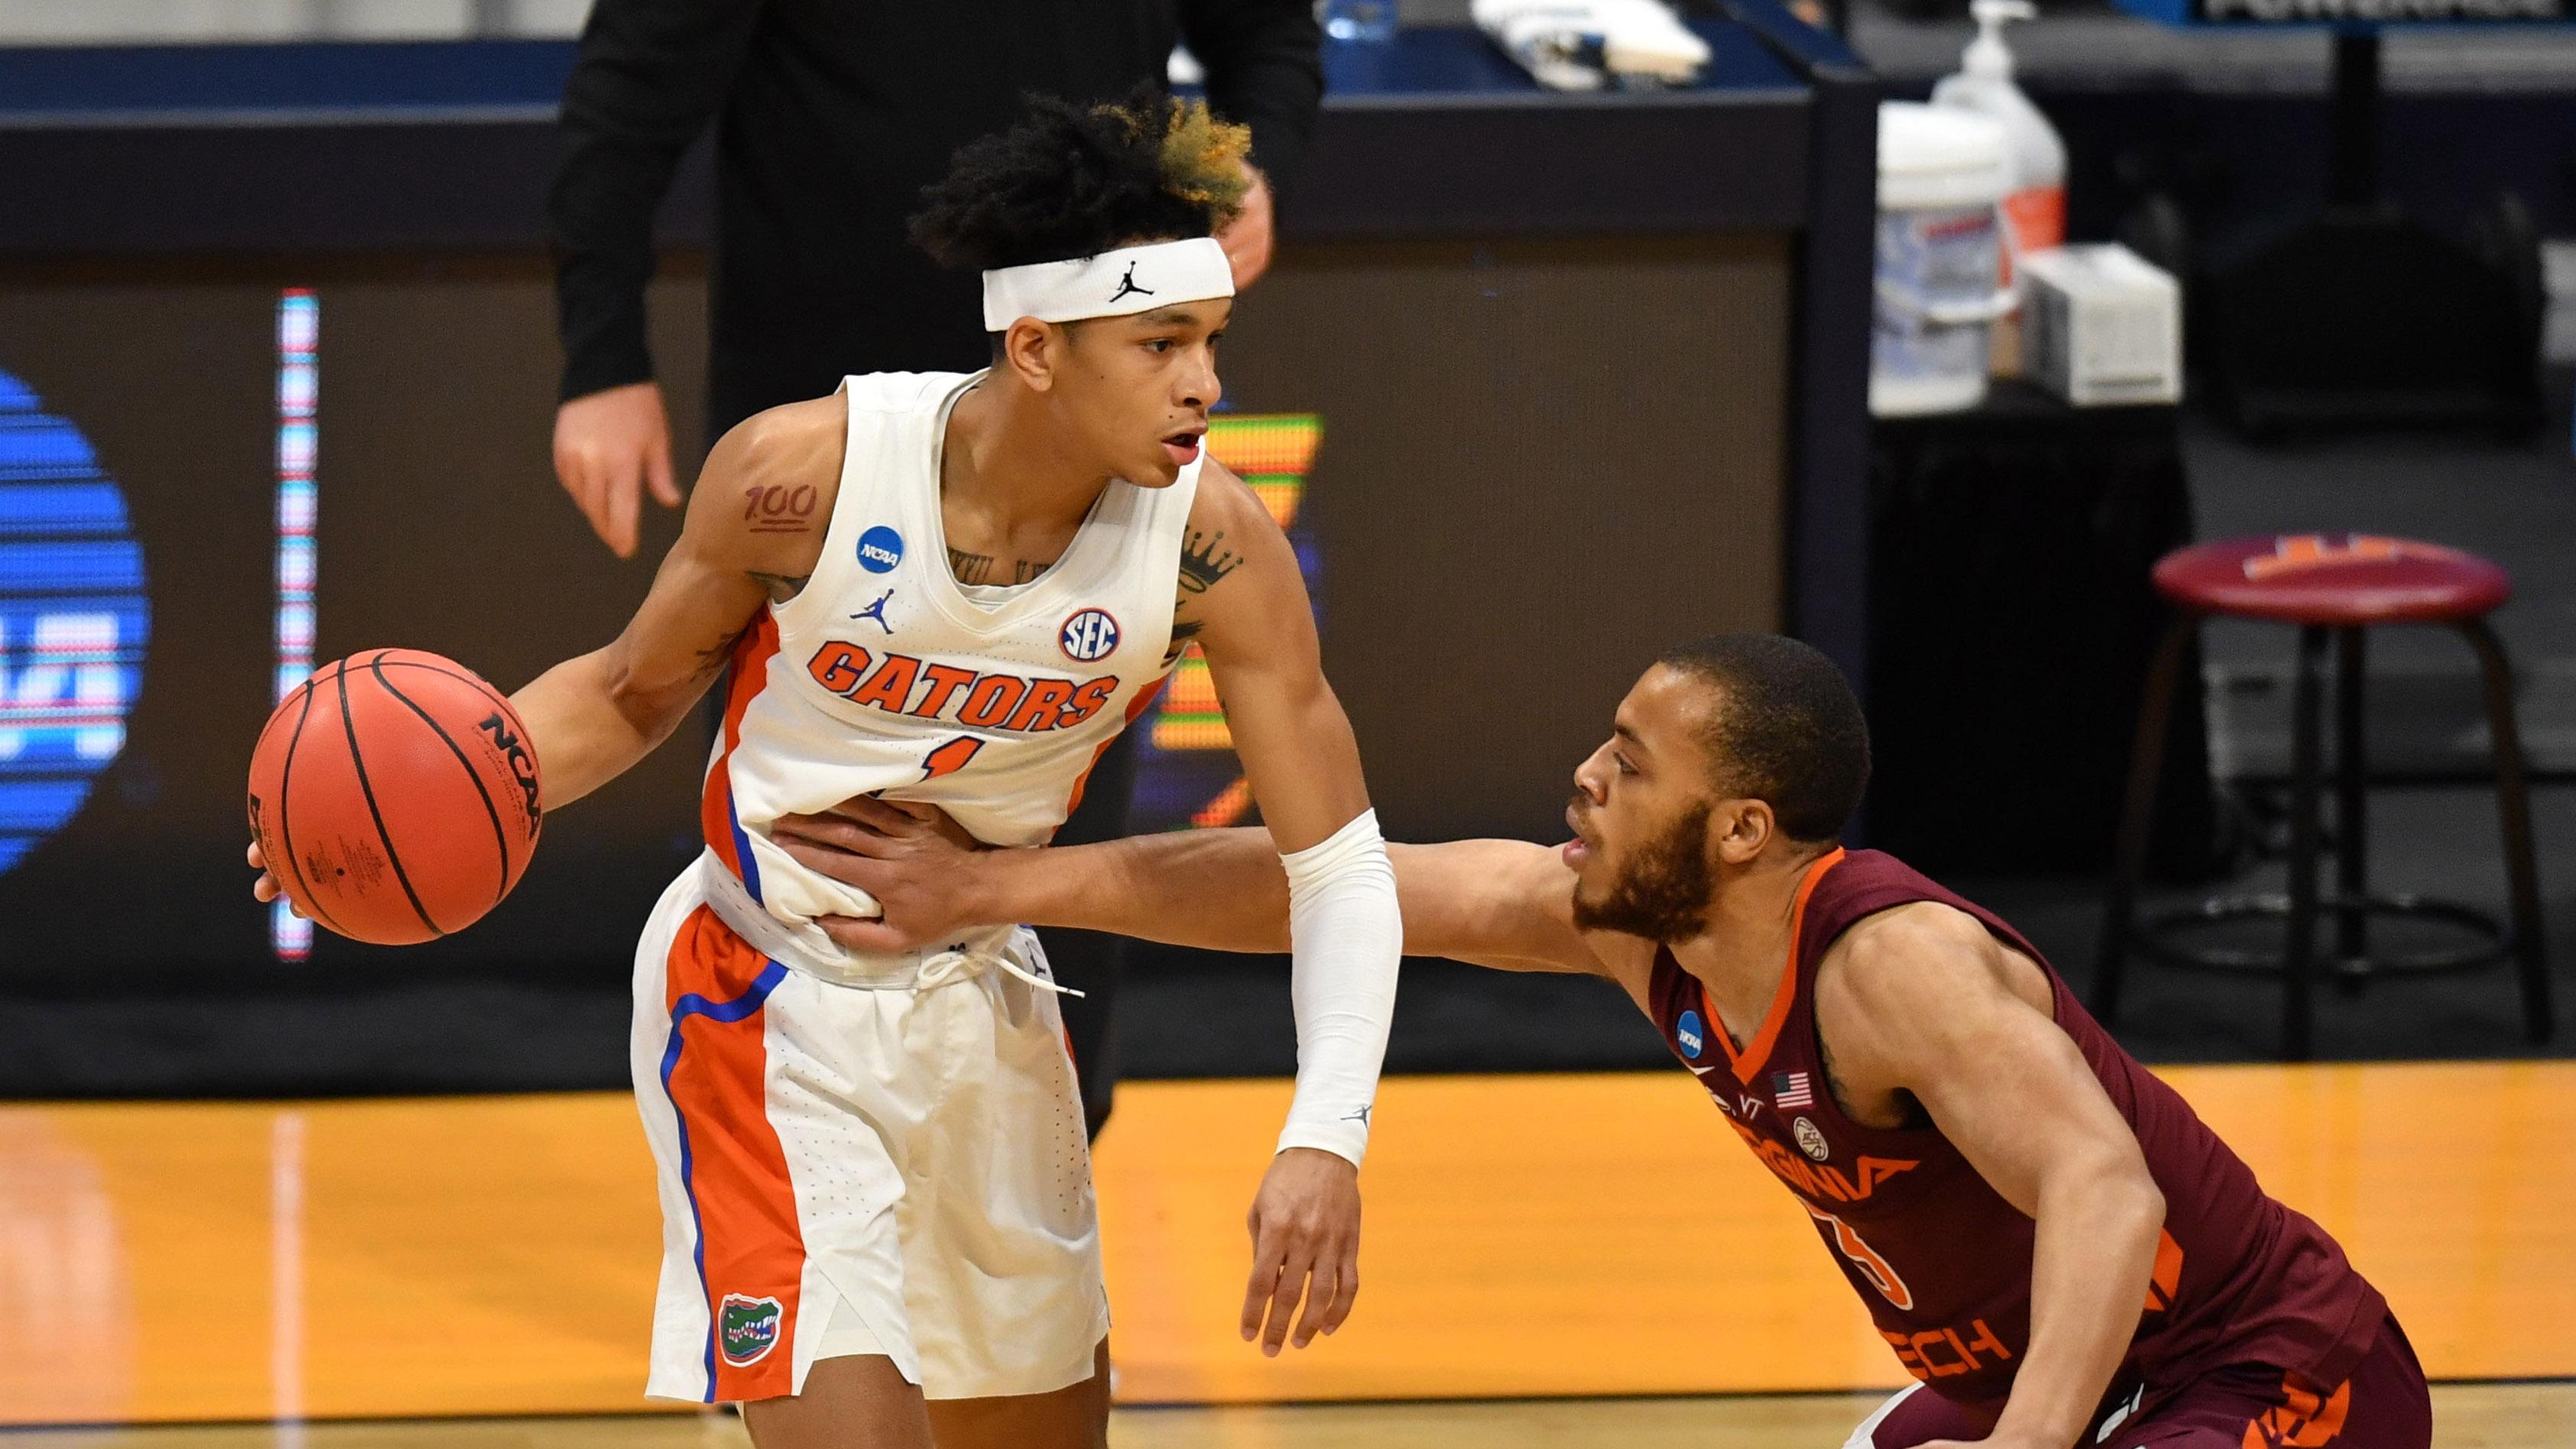 Florida Gators guard Tre Mann (1) is defended by Virginia Tech Hokies guard Wabissa Bede (3) during the first round of the 2021 NCAA Tournament at Hinkle Fieldhouse. / Patrick Gorski-USA TODAY Sports